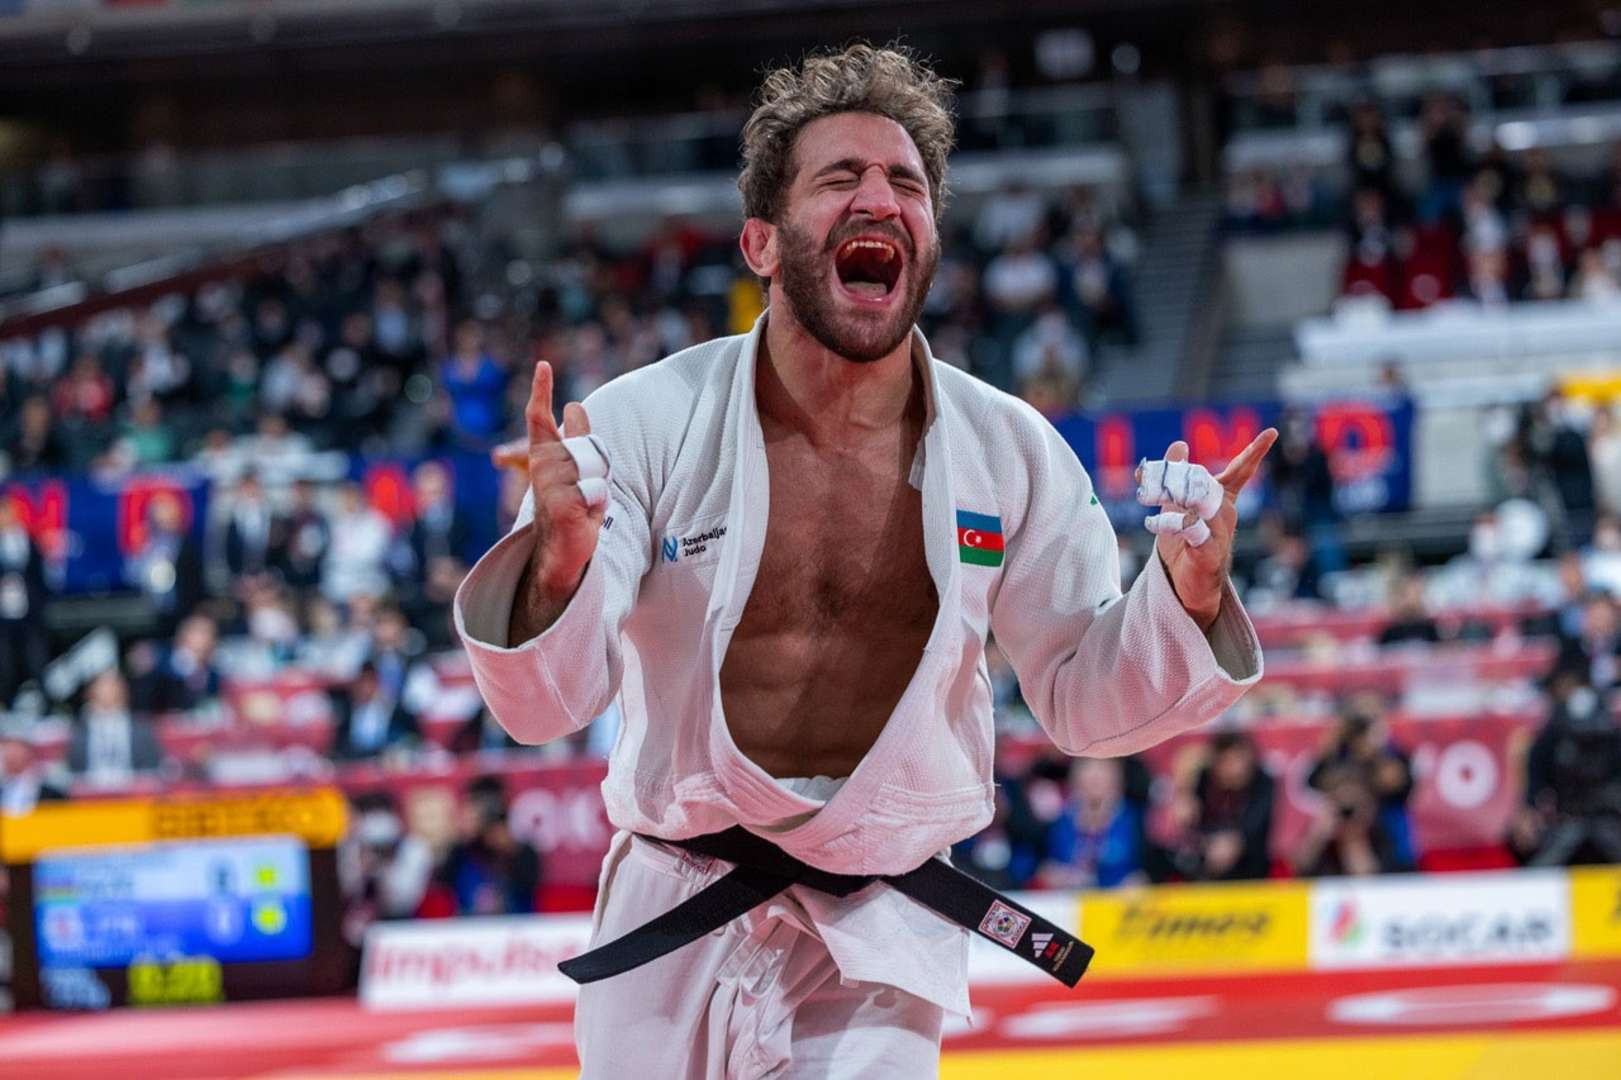 Heydarov established himself once more in Tokyo, Mahuro stunned the world champion © IJF